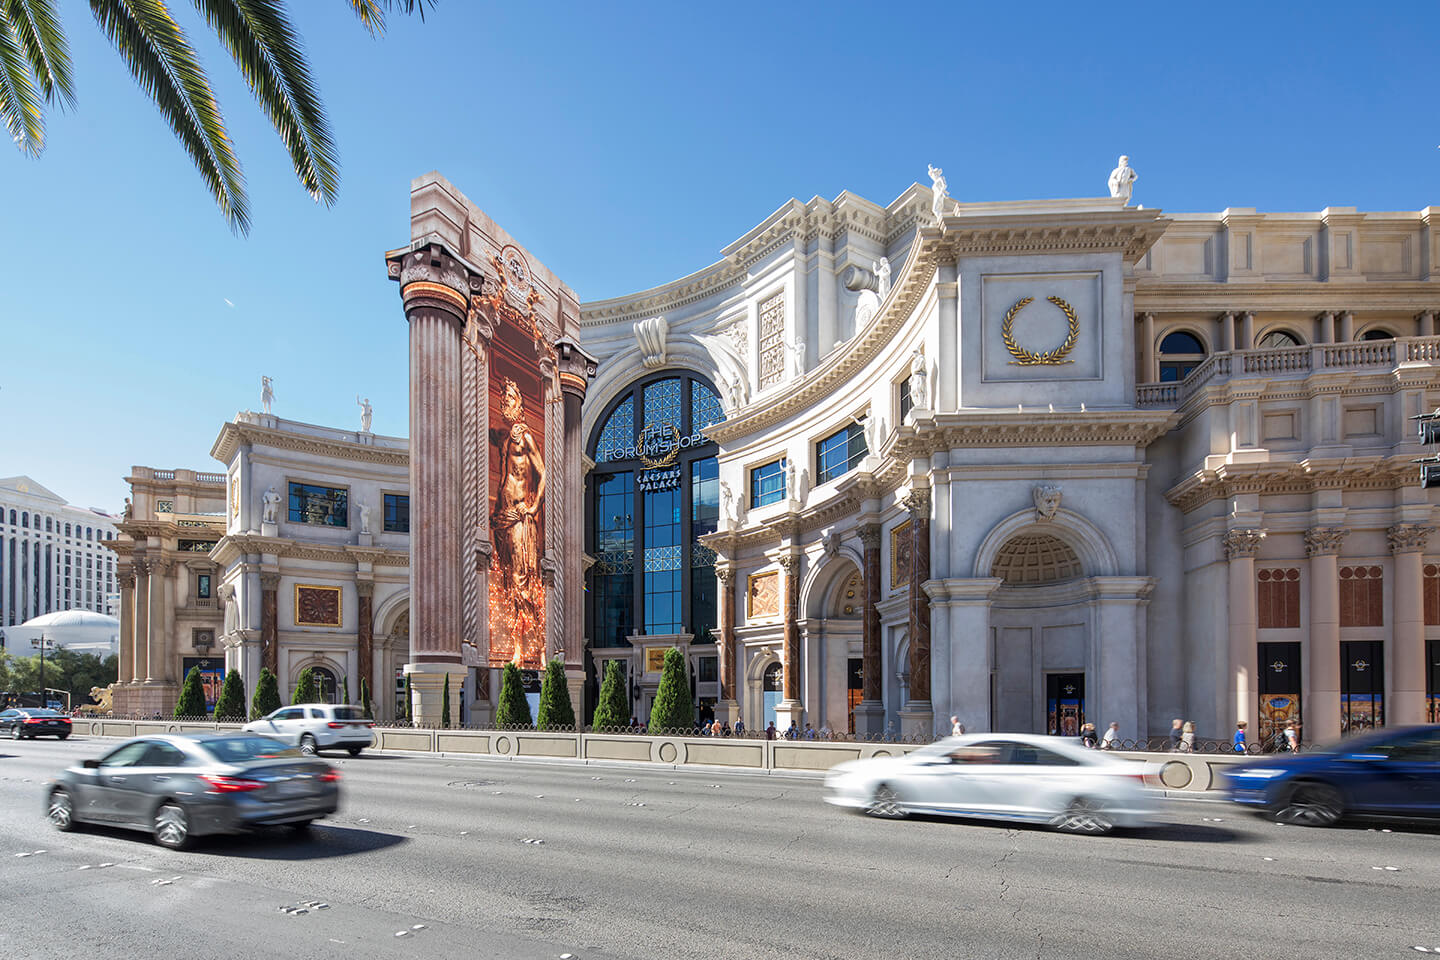 About The Forum Shops At Caesars Palace A Shopping Center In